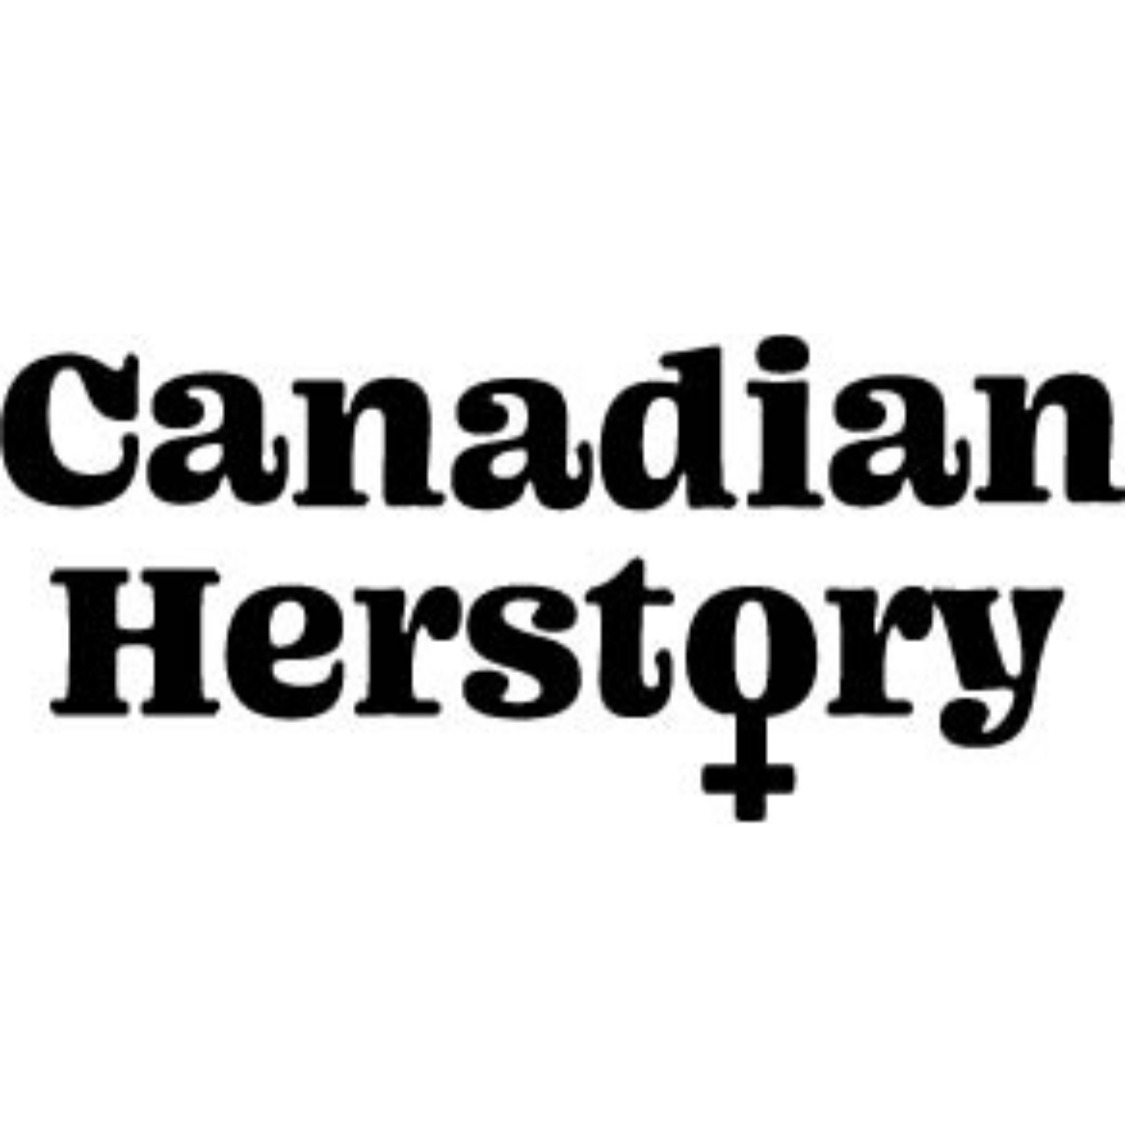 Canadian Herstory